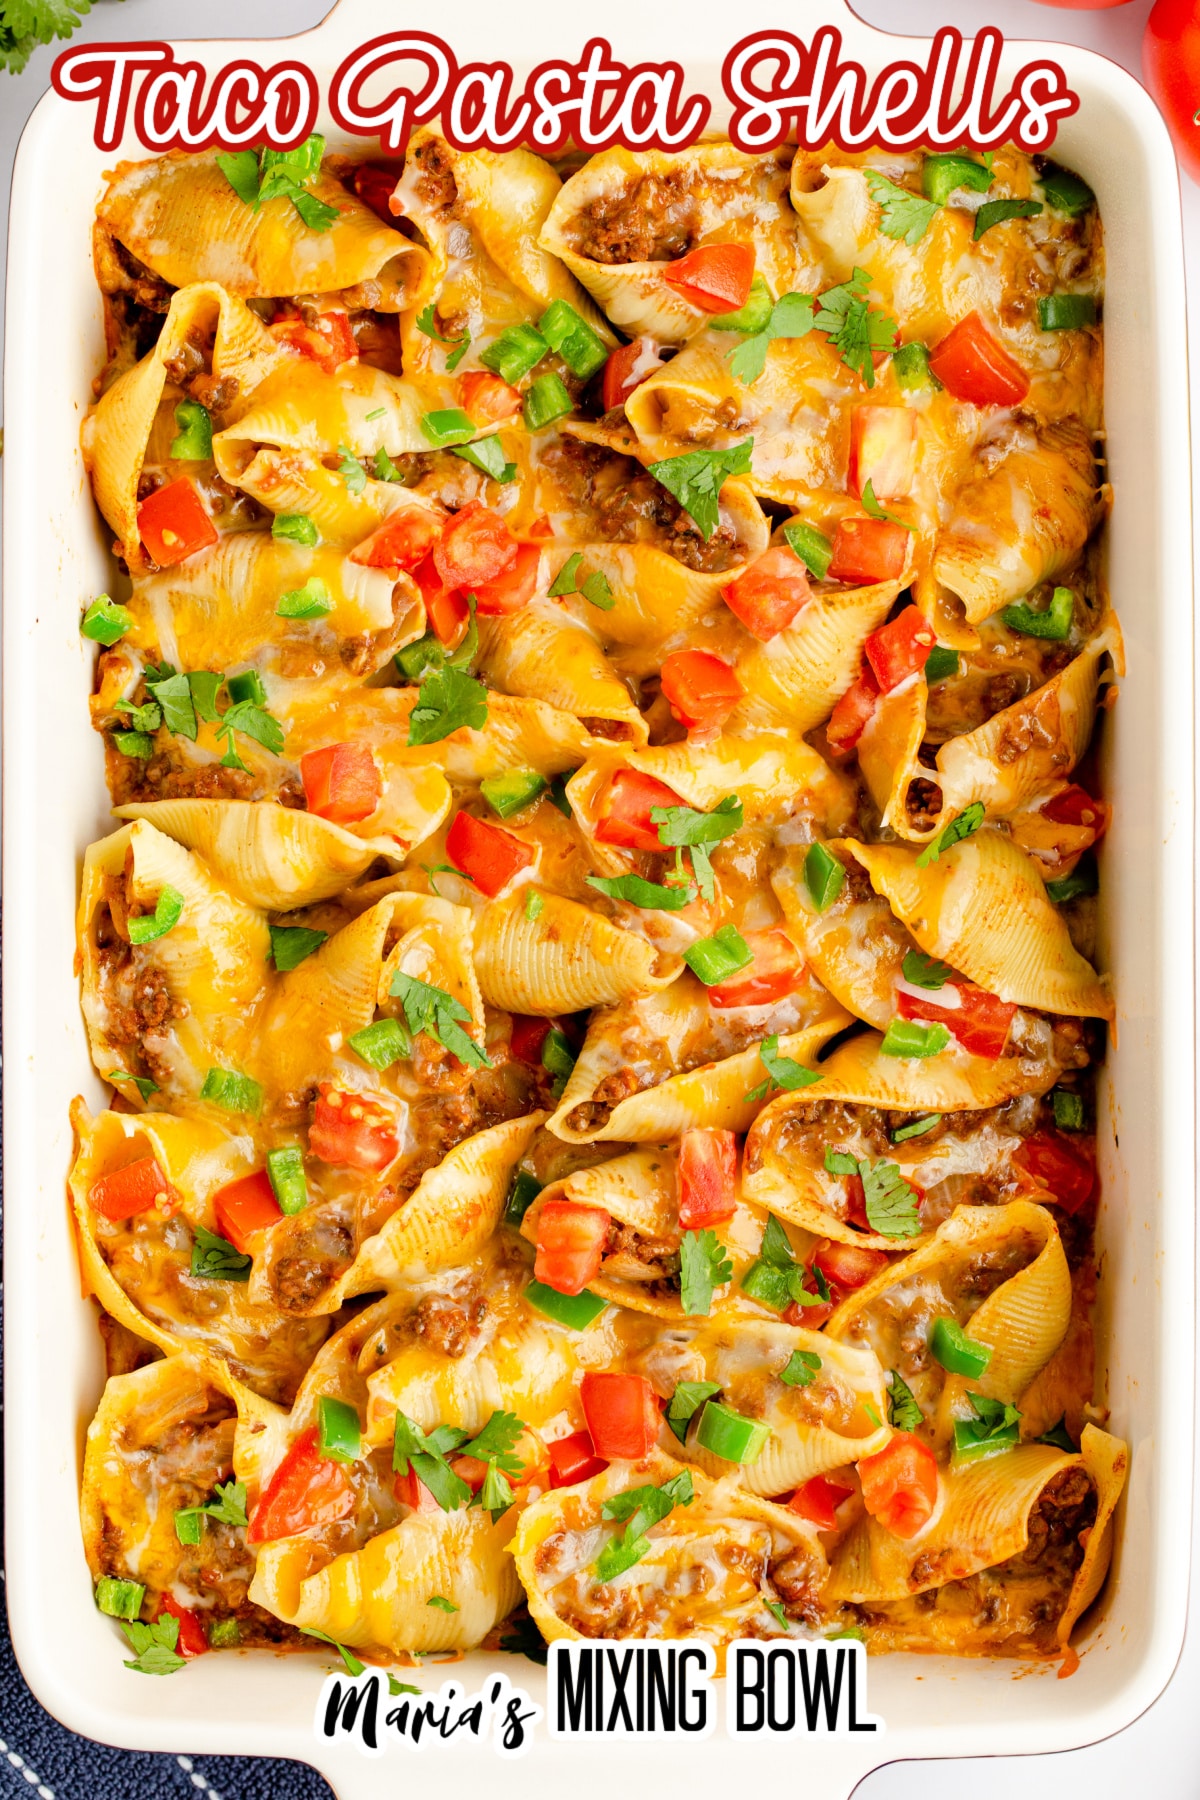 casesrole dish full of taco pasta shells in a white casserole dish with the name in text